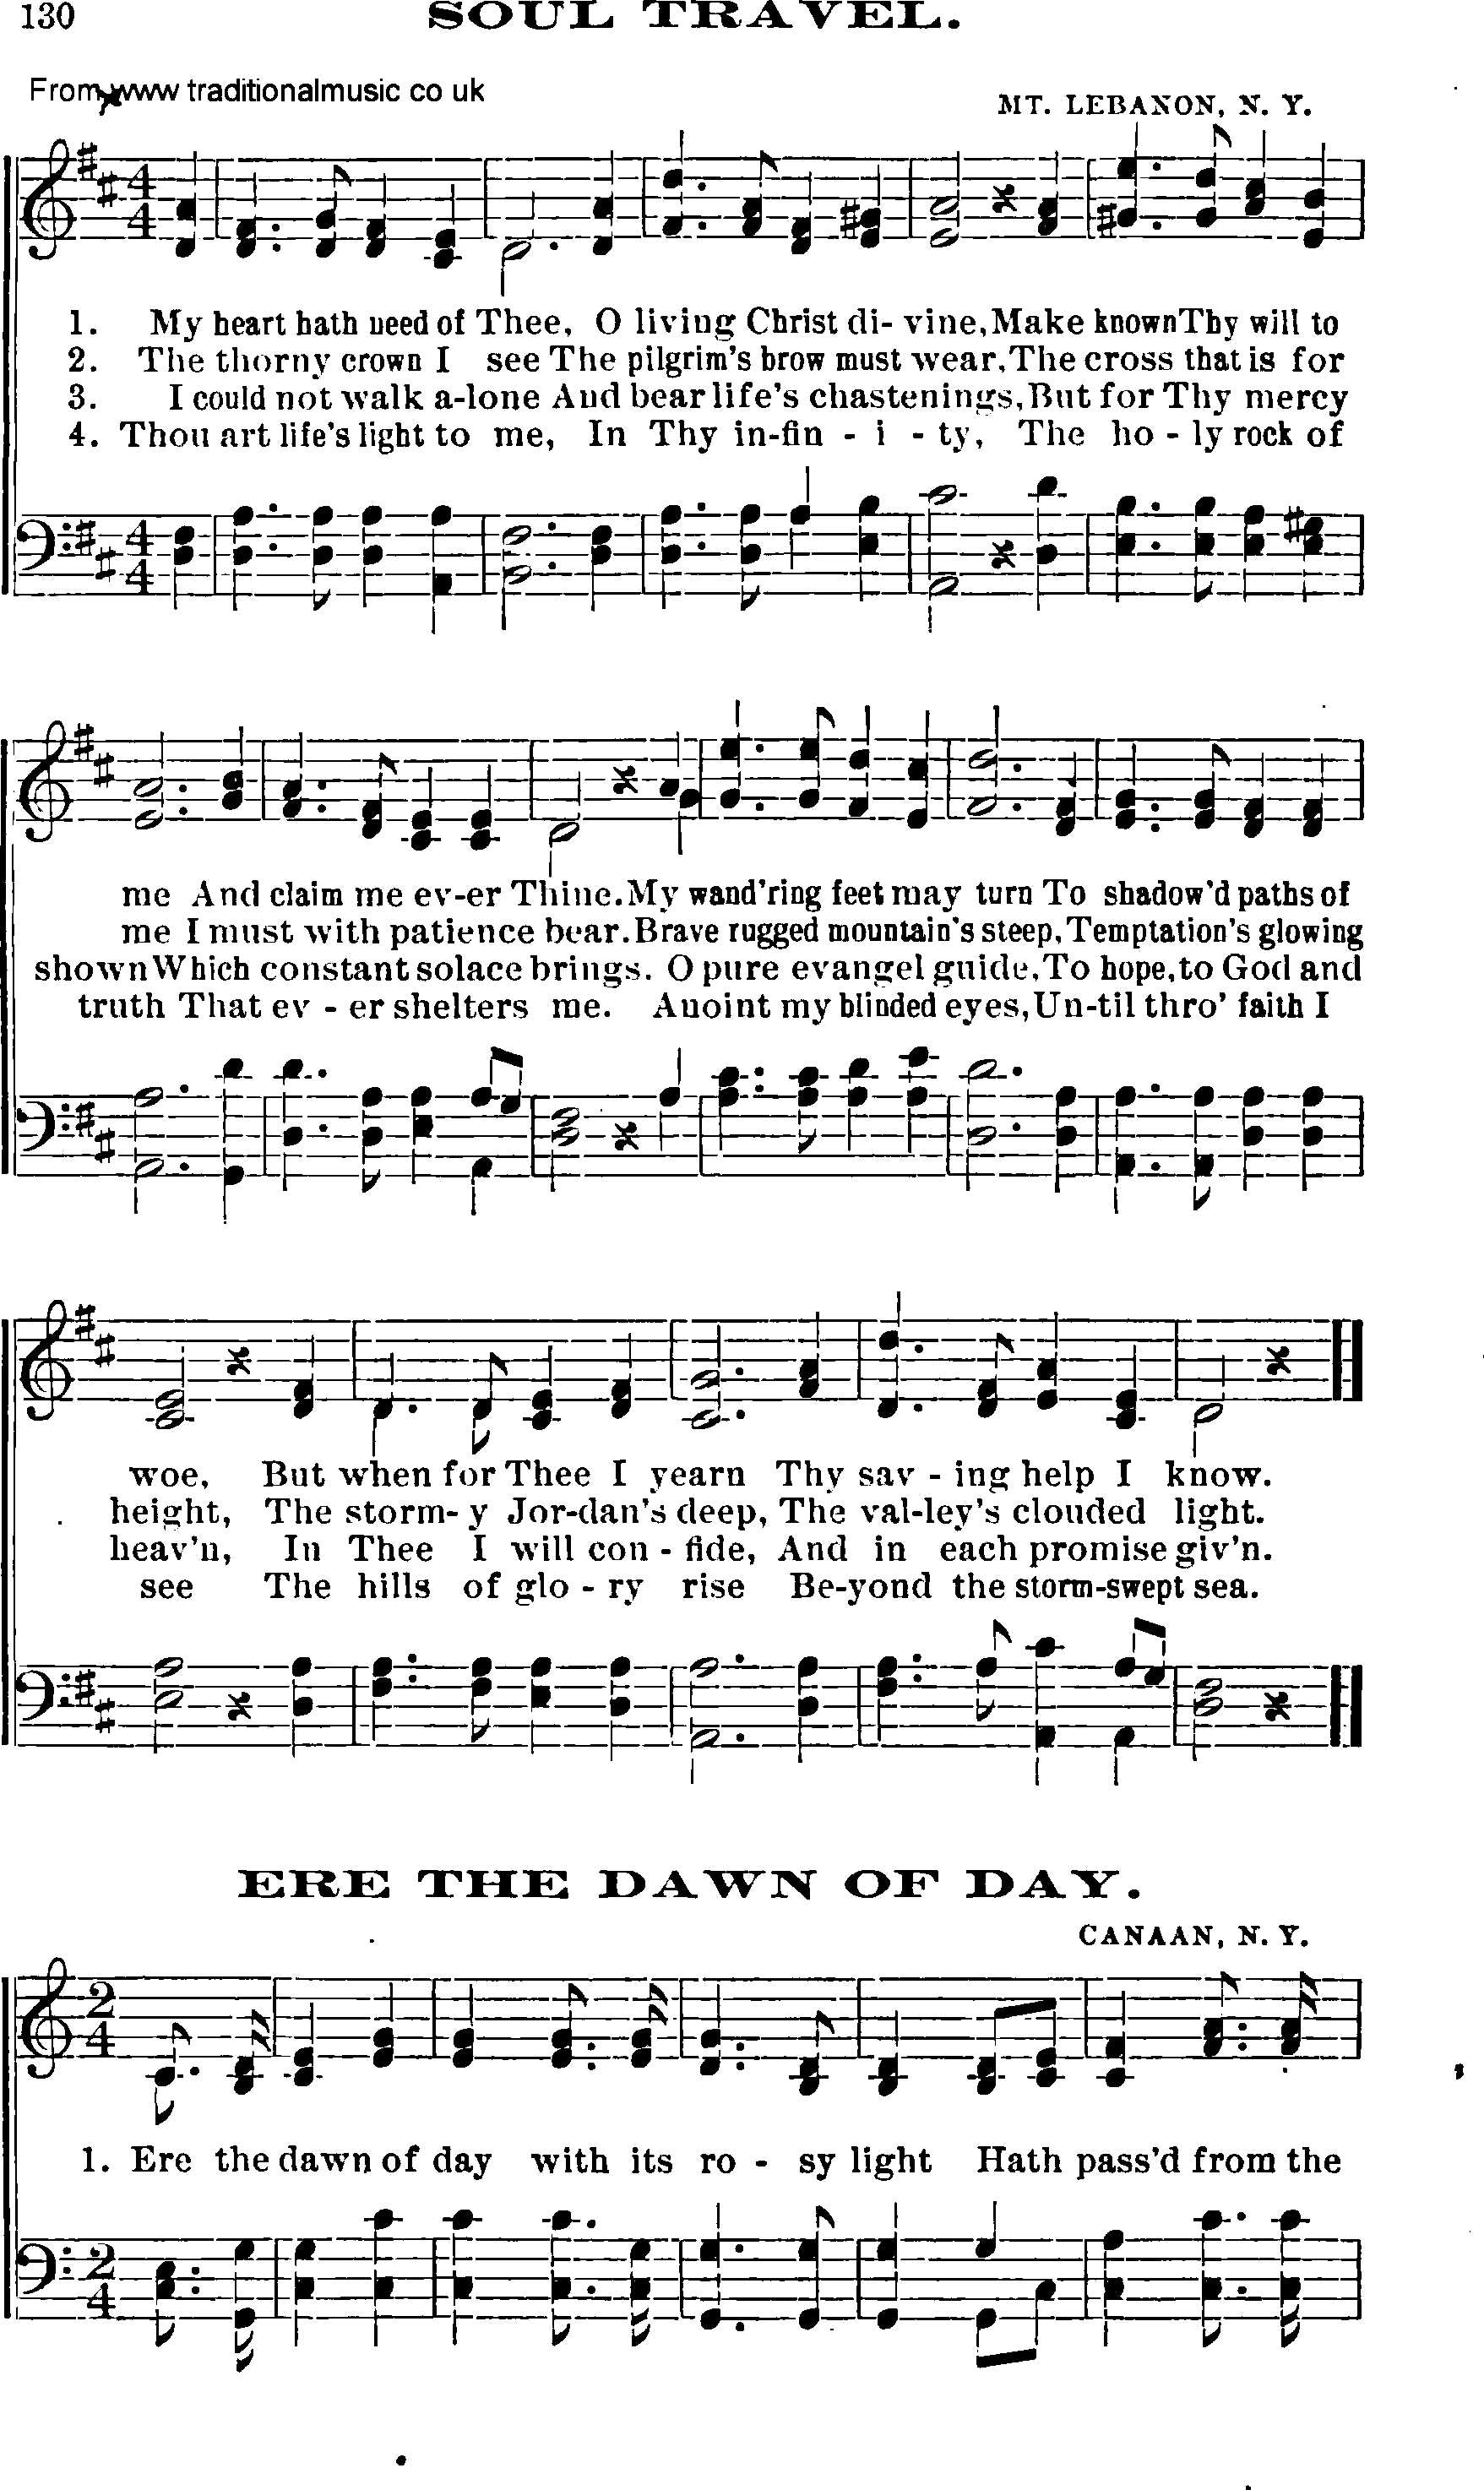 Shaker Music collection, Hymn: soul travel, sheetmusic and PDF